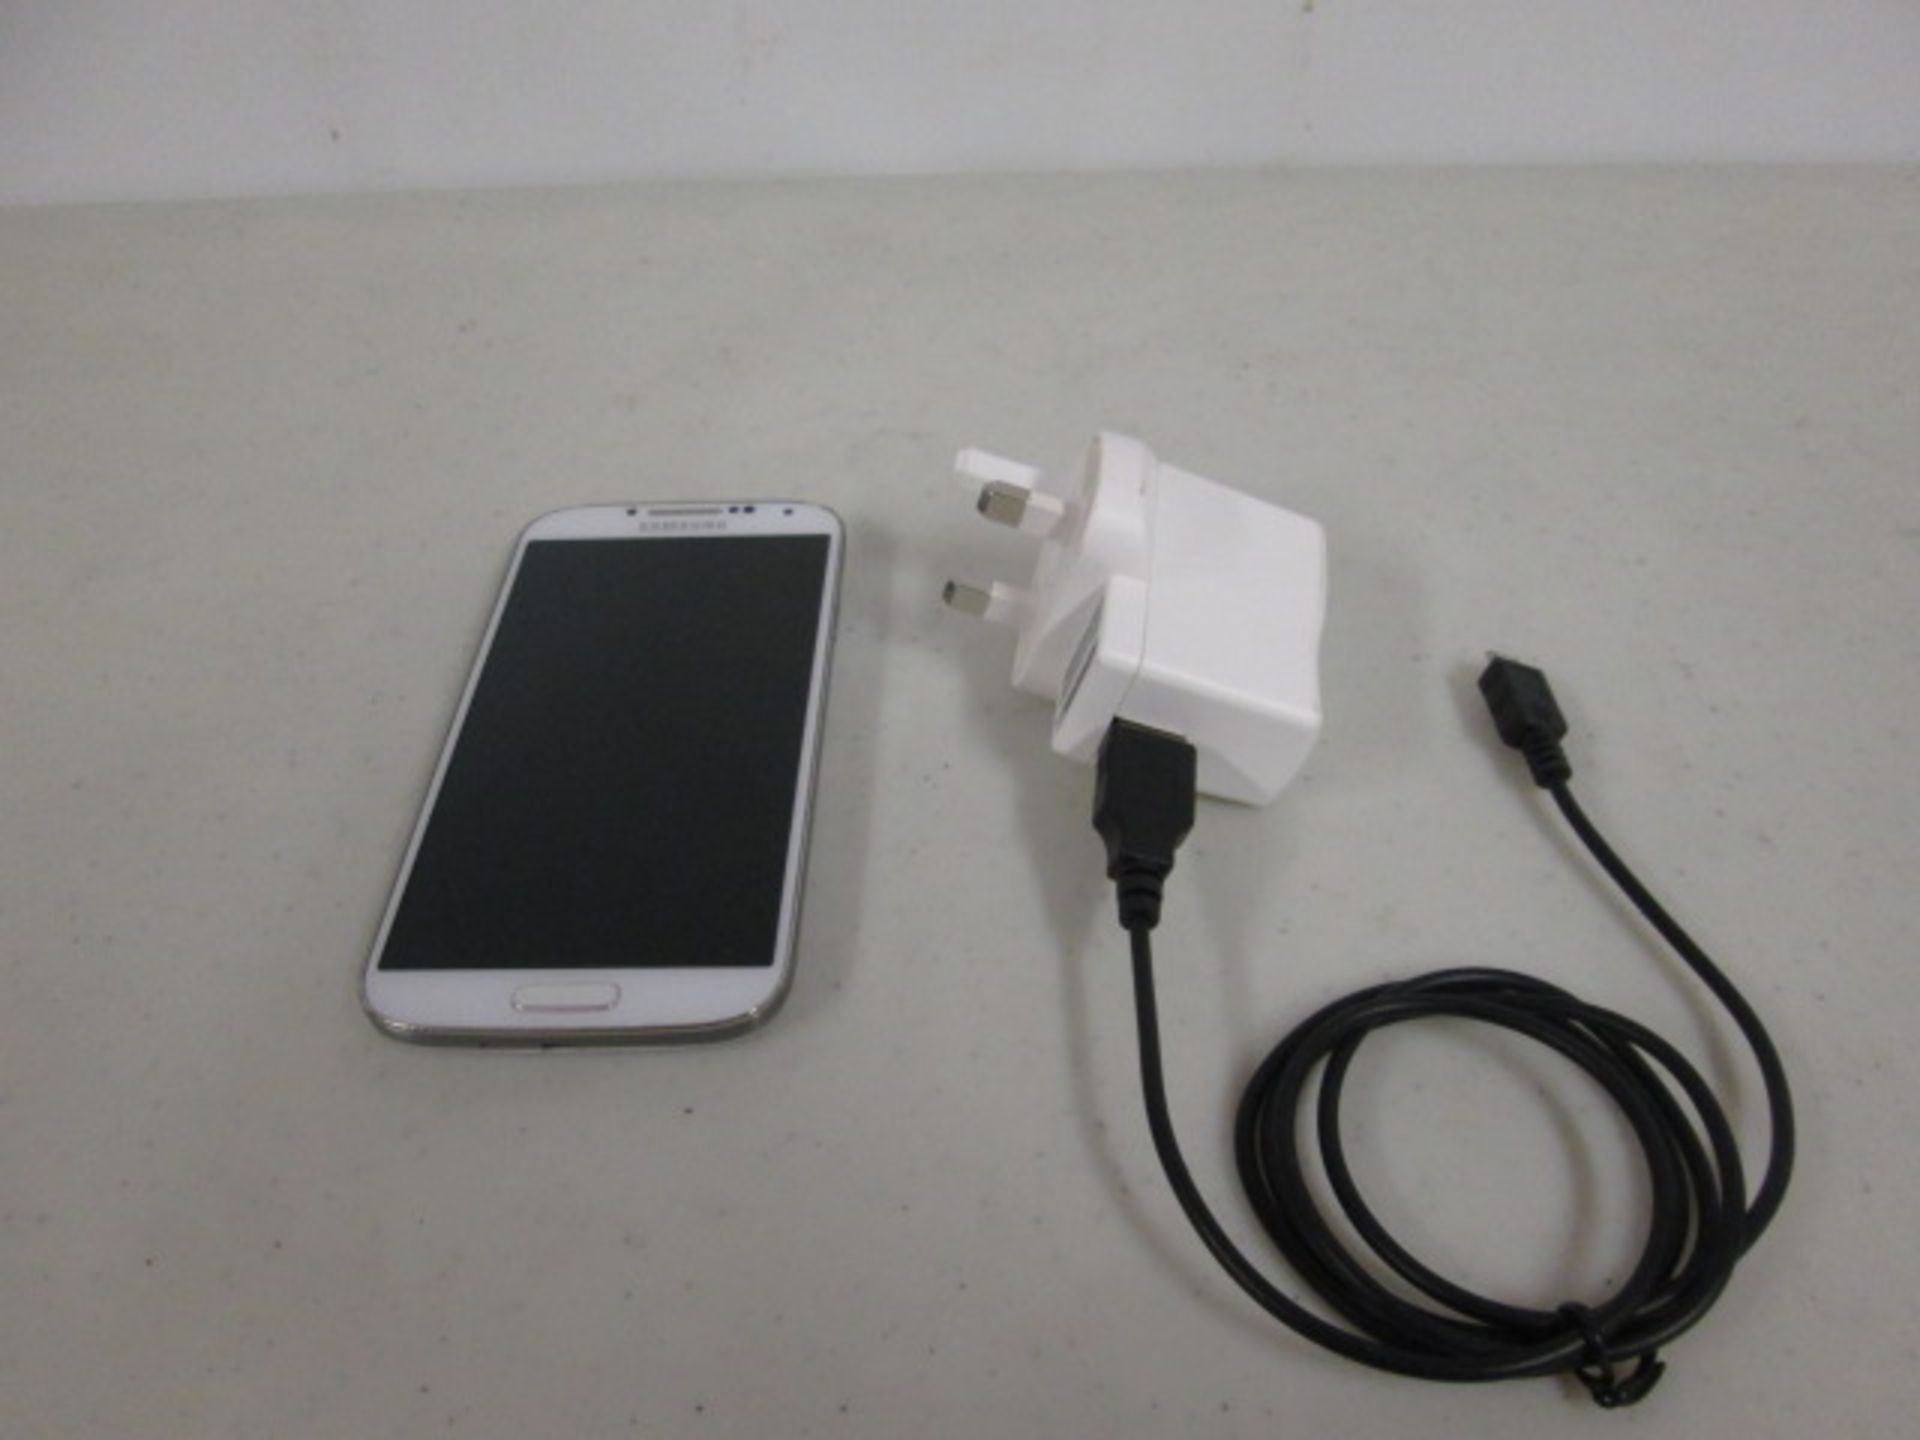 Samsung Galaxy S4 Mobile Phone, Model GT-19505, 16GB. Colour White. Comes with Charger. Locked to - Image 4 of 6